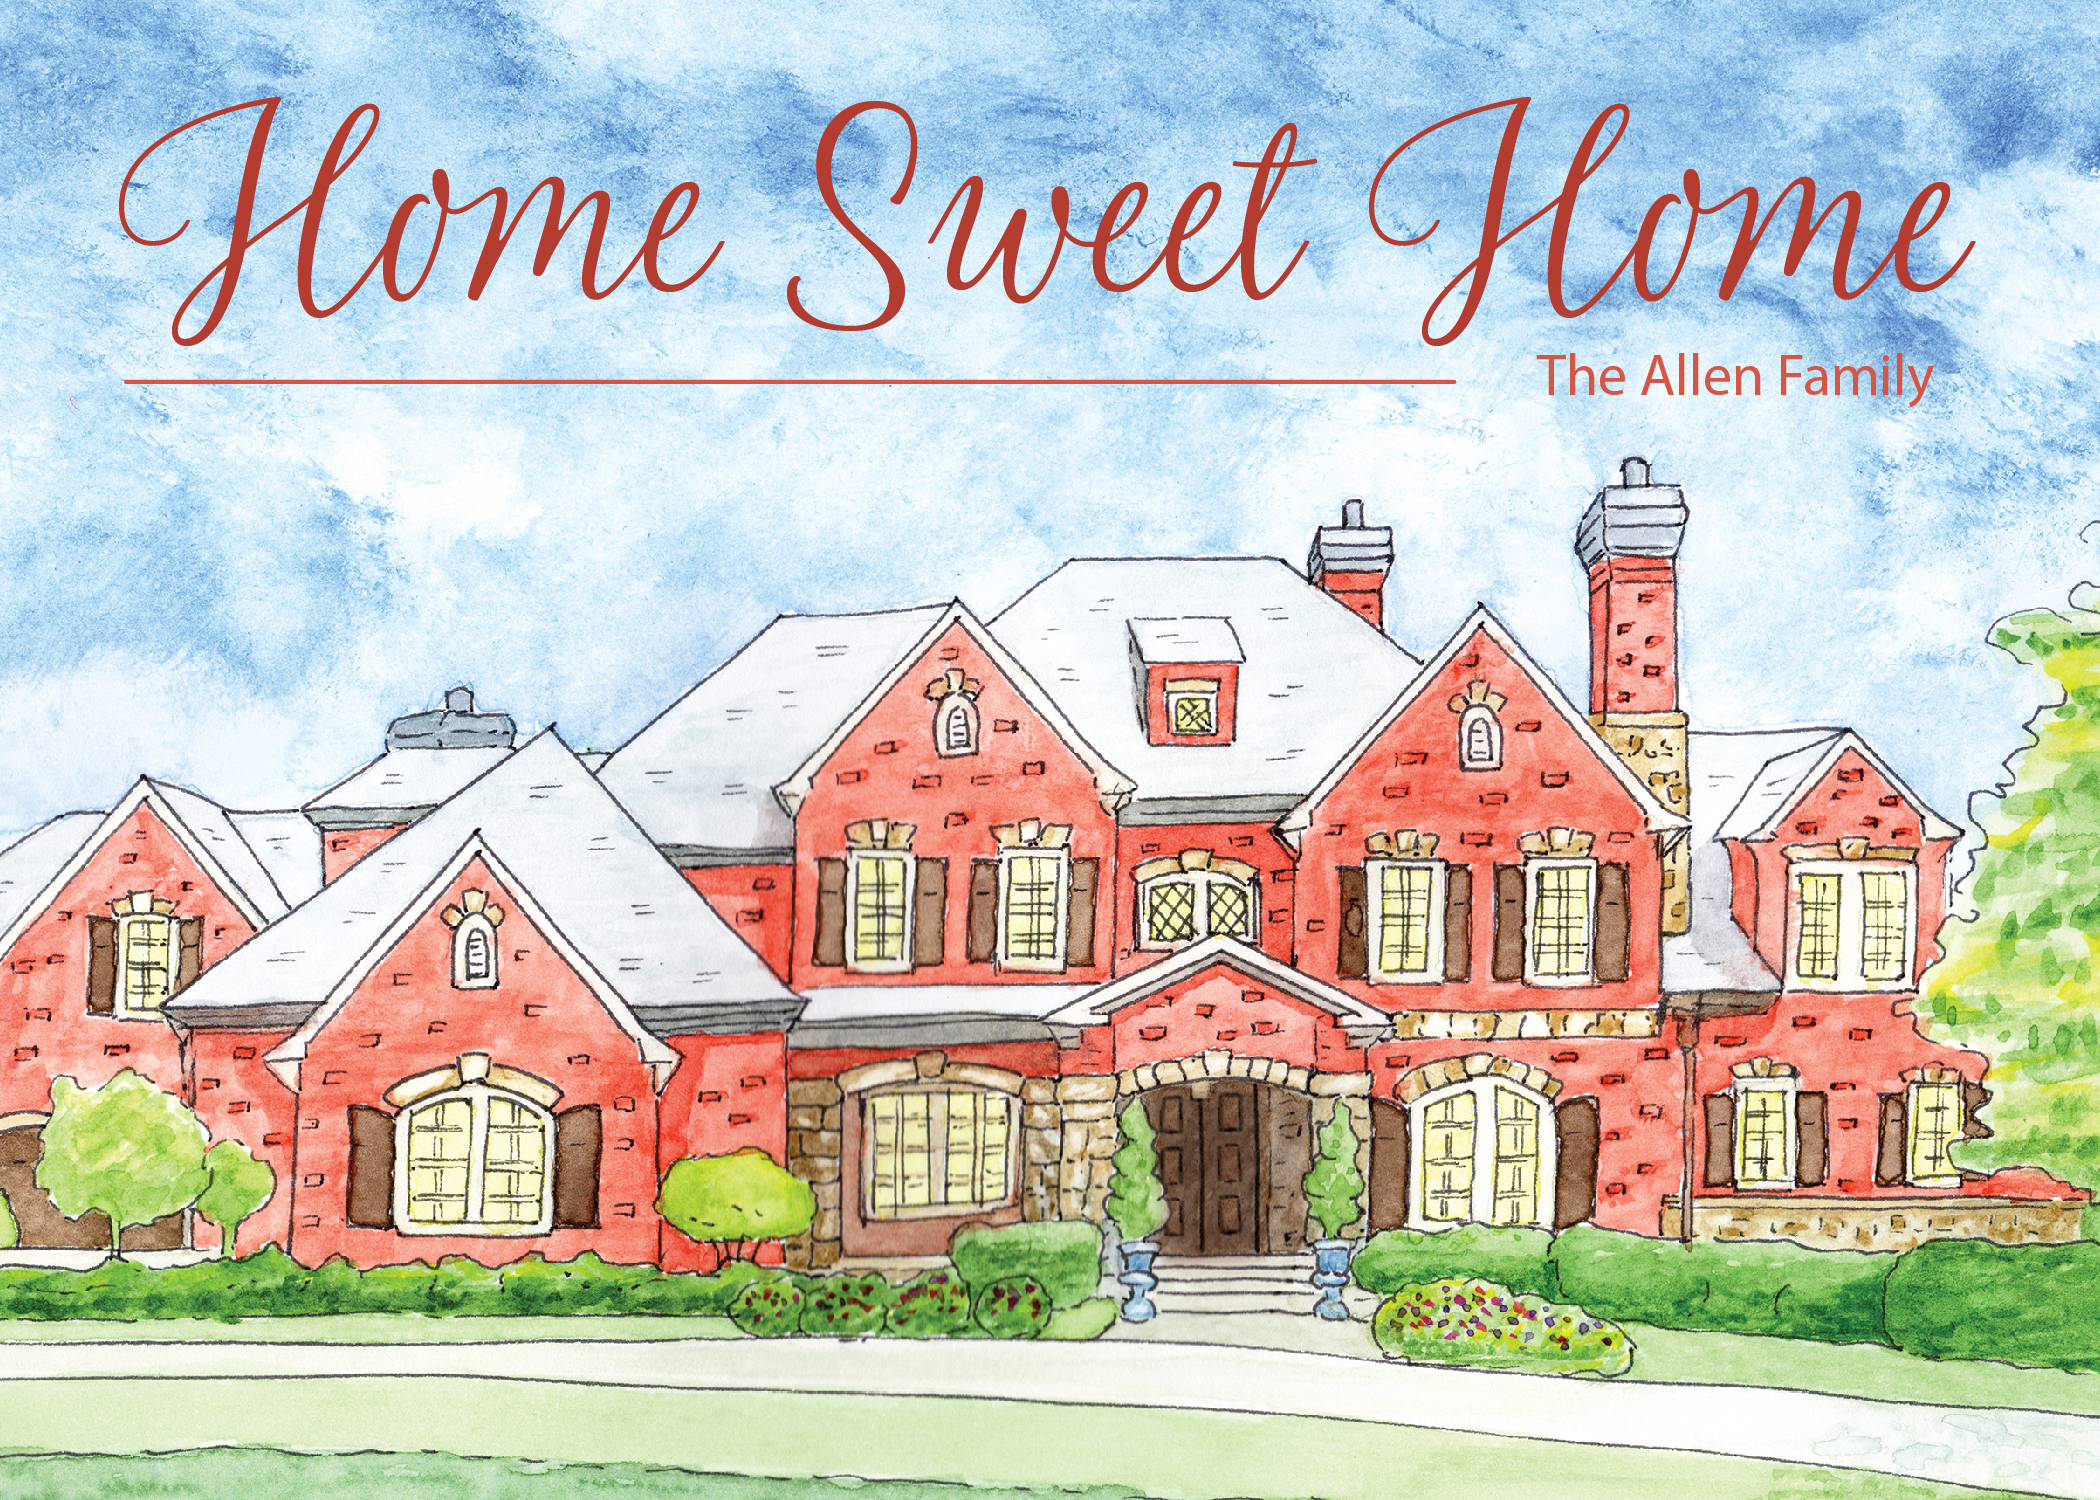 Custom Illustration of a house for a moving card